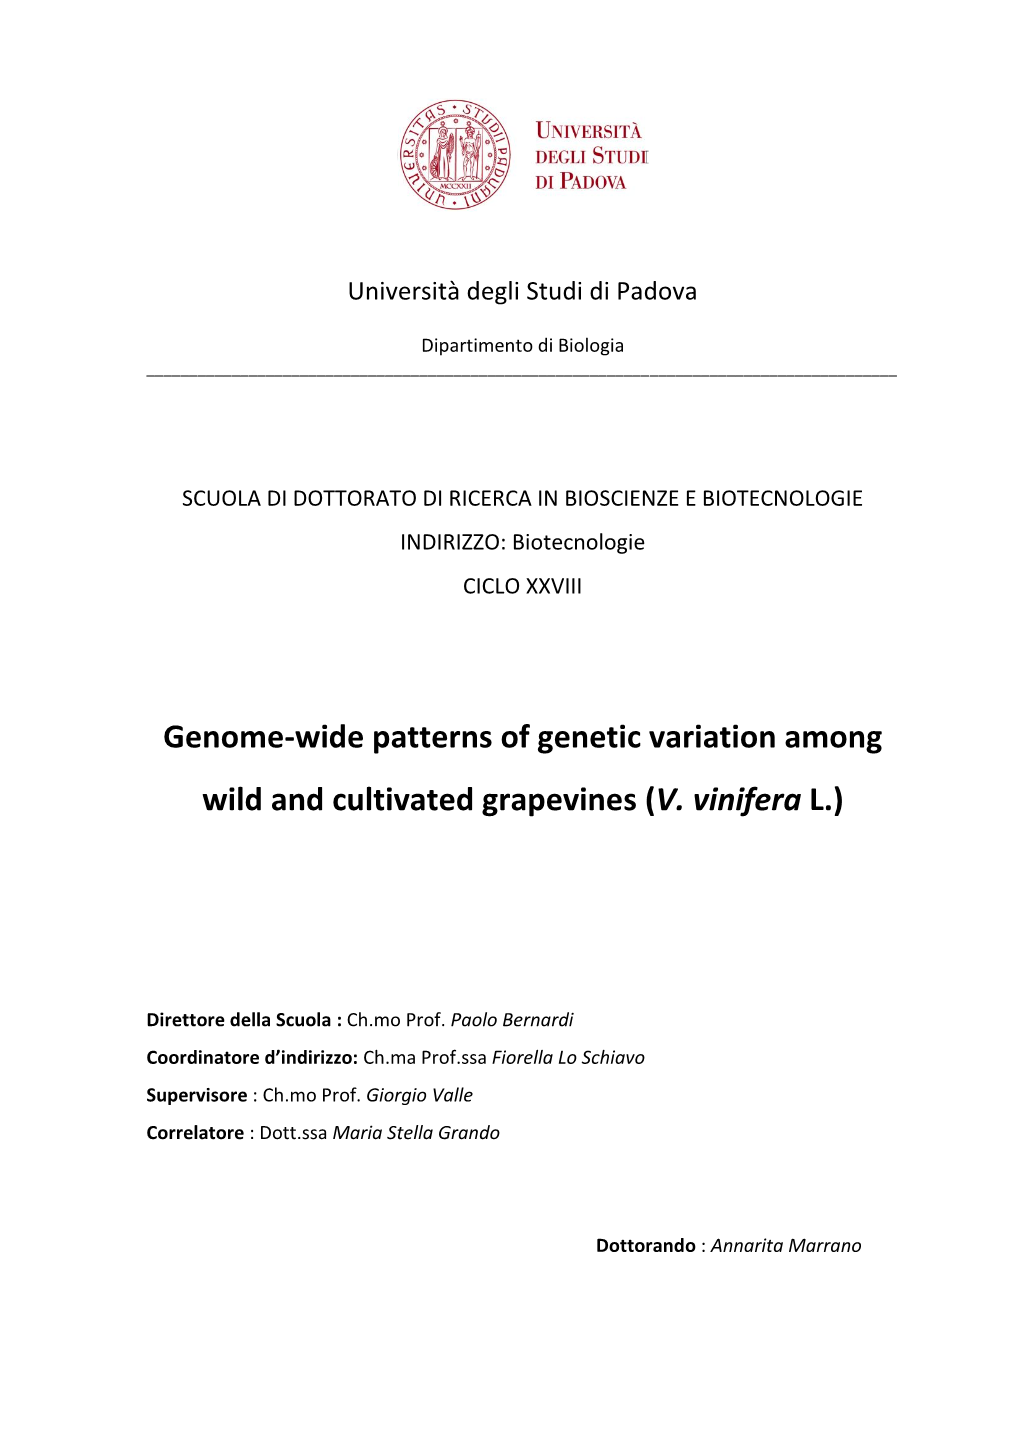 Genome-Wide Patterns of Genetic Variation Among Wild And